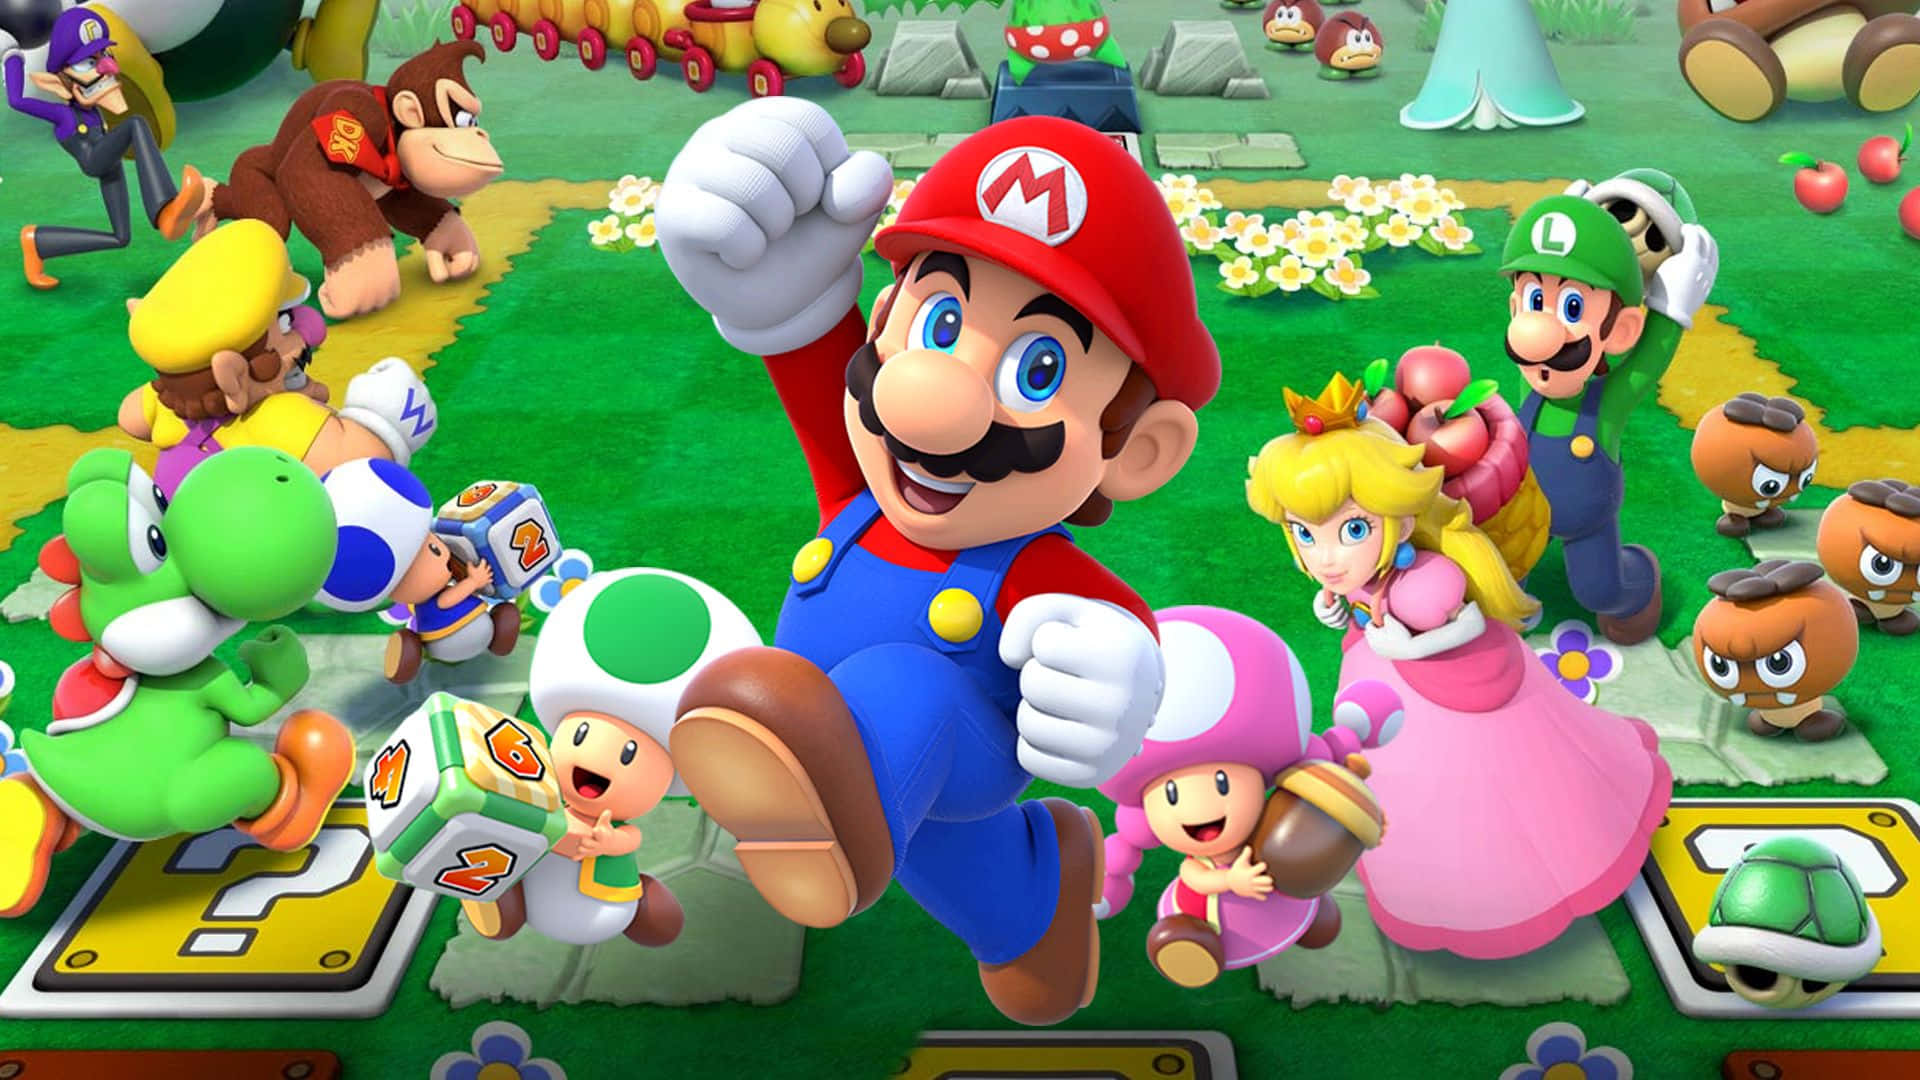 Join the party with Mario and friends! Wallpaper